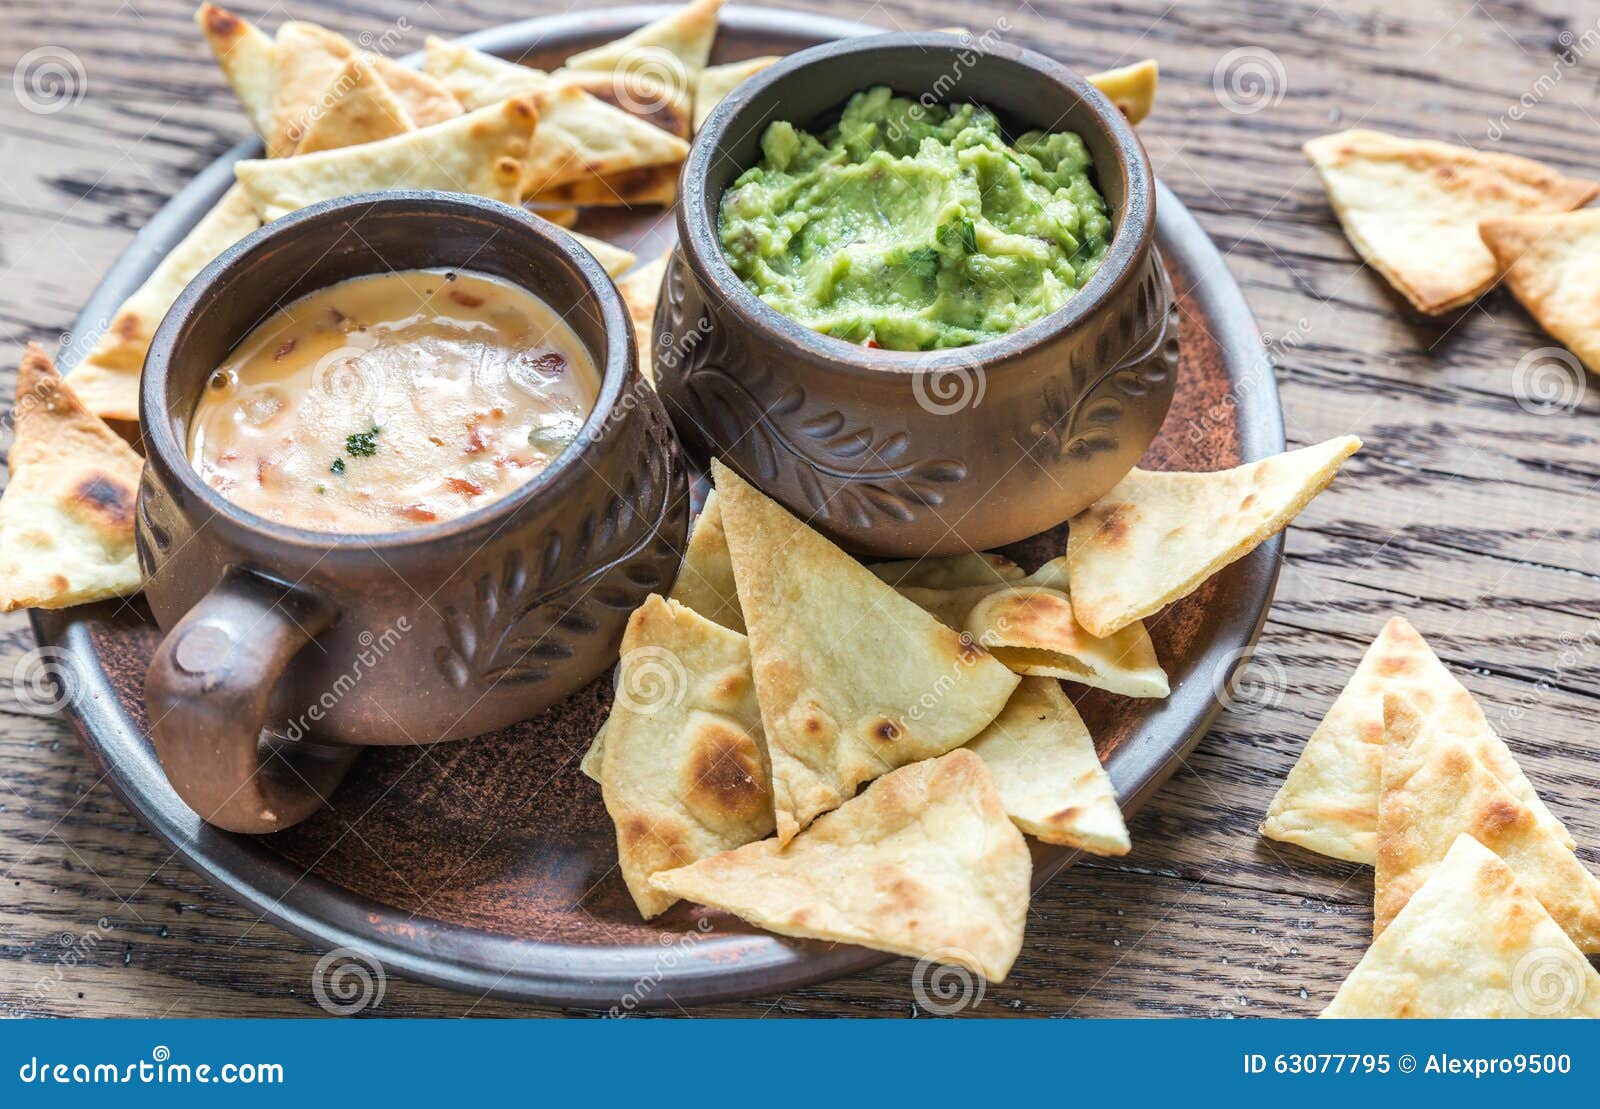 bowls of guacamole and queso with tortilla chips